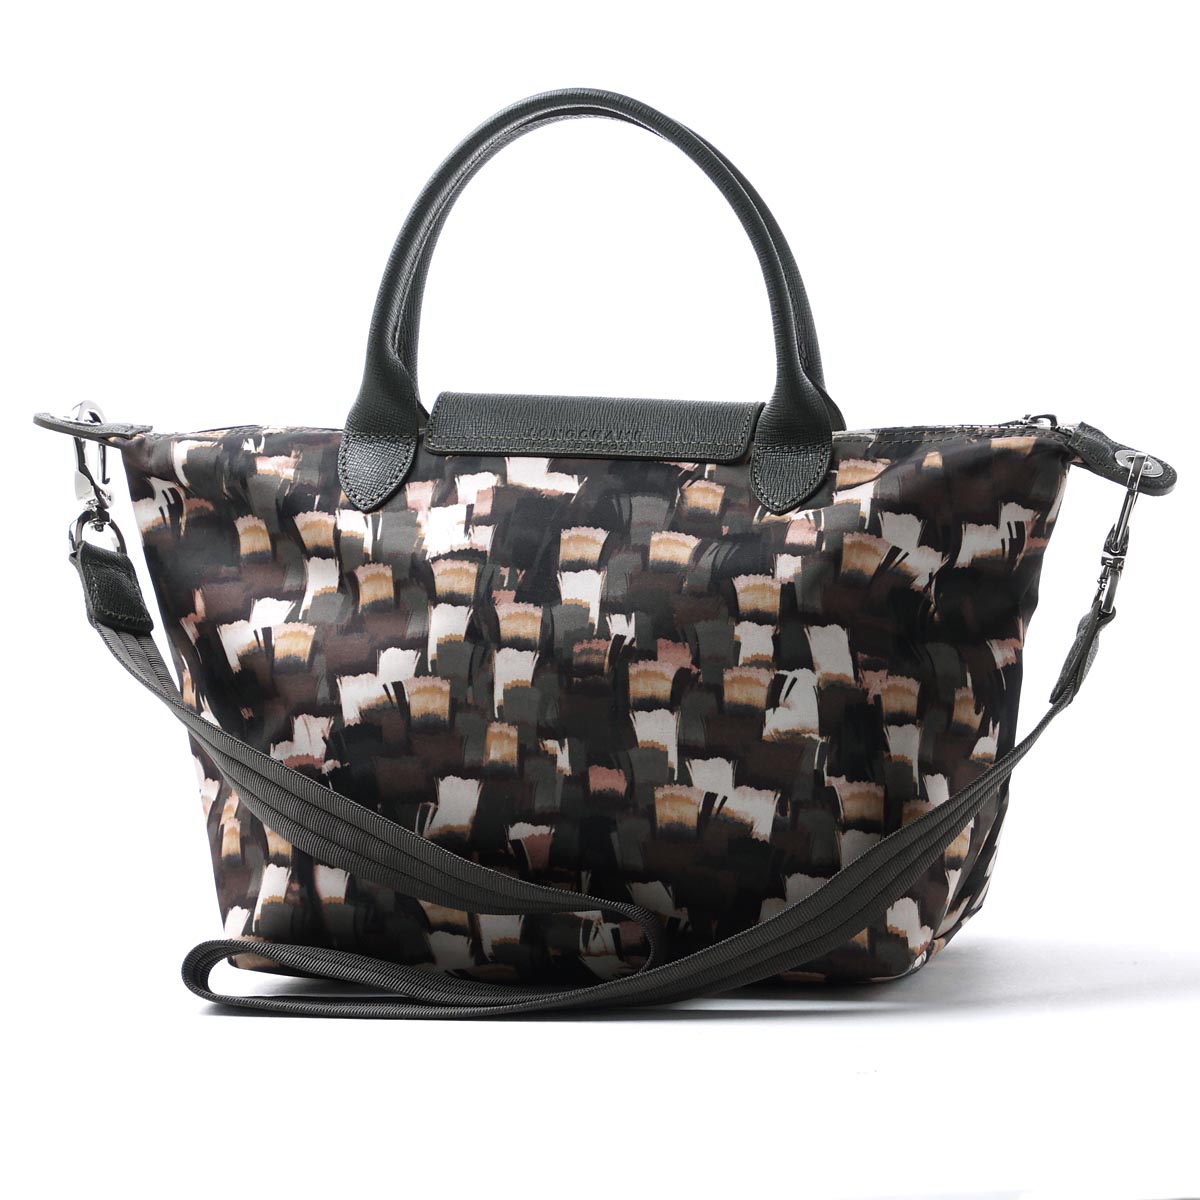 Longchamp Bag Prices South Africa | Confederated Tribes of the Umatilla Indian Reservation